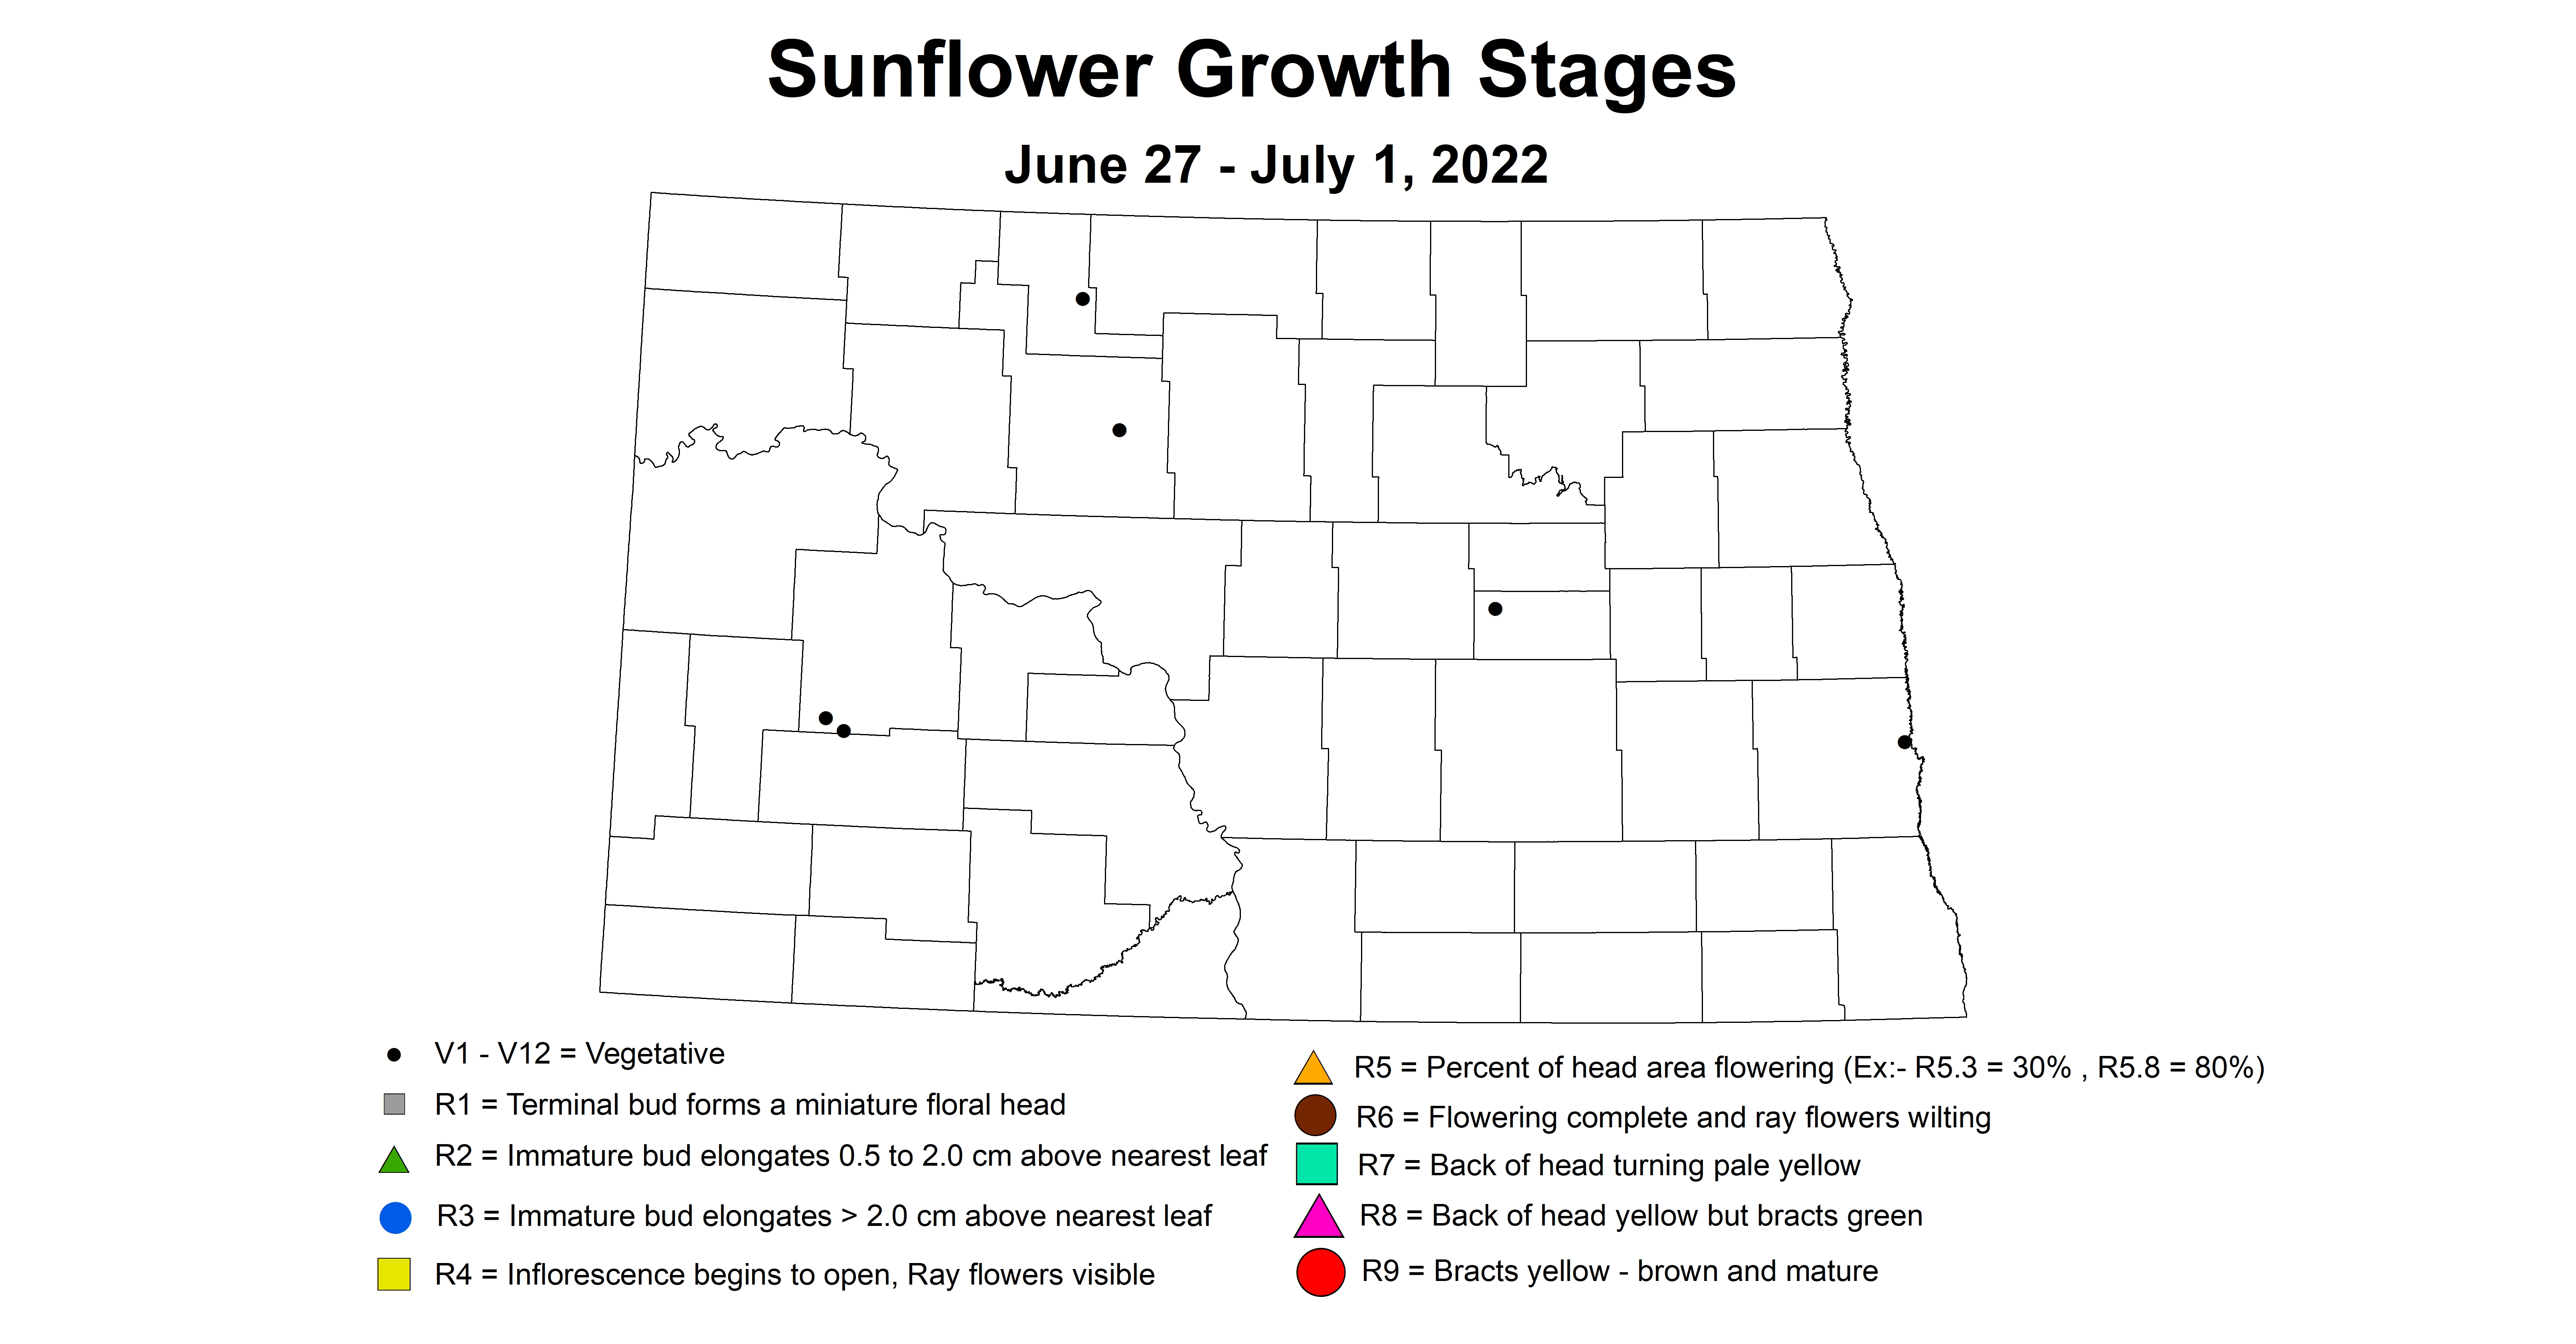 ND IPM Map of sunflower growth stages June 27 to July 1,2022